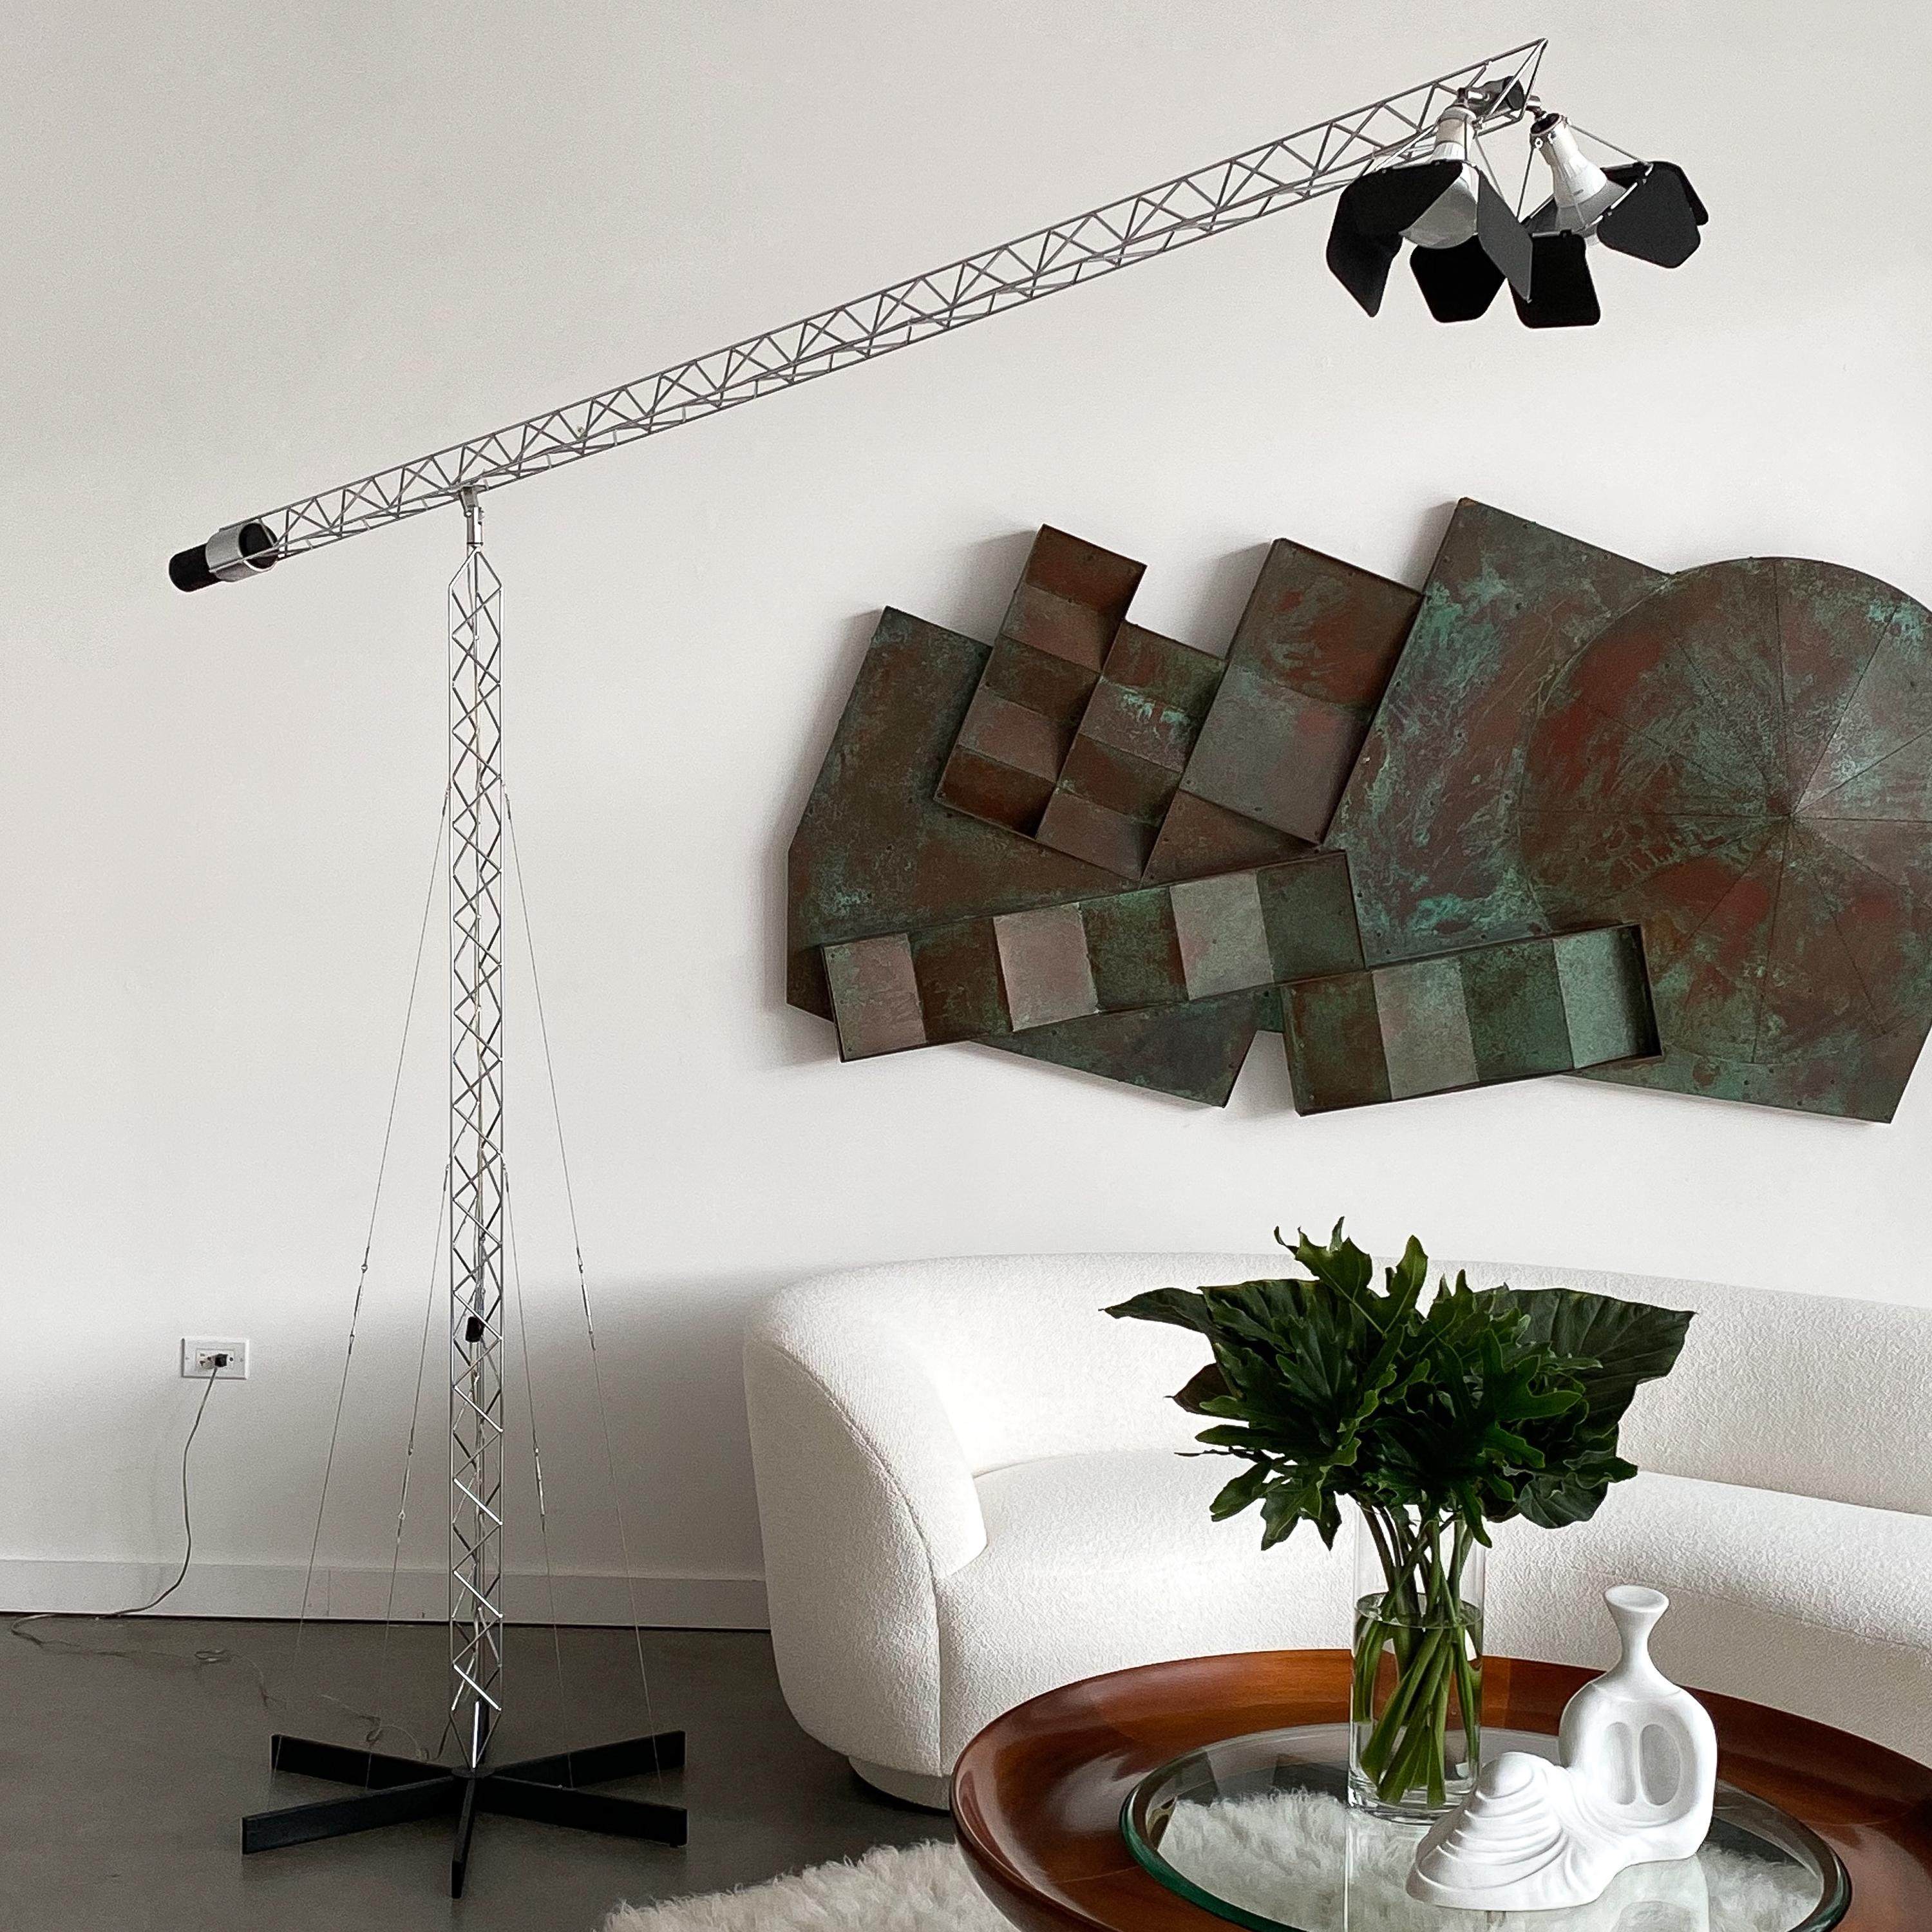 This large-scale, 1970s Curtis Jere floor lamp is shaped like a crane with a counter balanced arm which terminates with two spotlight lamps with adjustable barn doors. The largest of the crane style lamps by Curtis Jere. Horizontal arm is